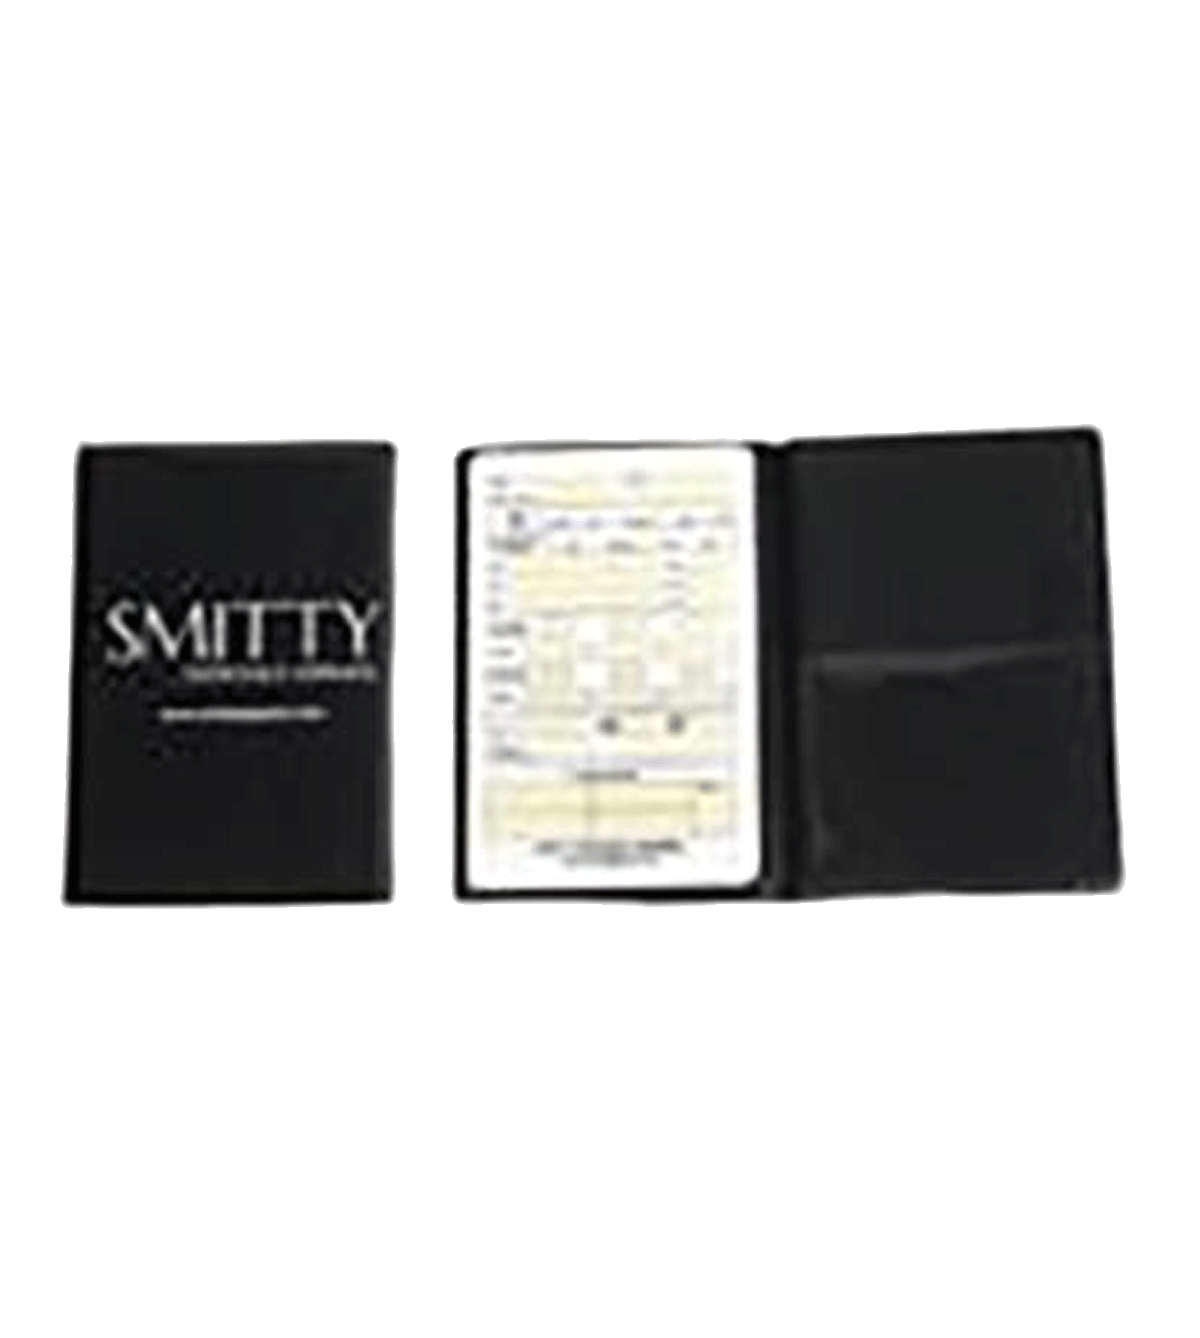 SMITTY Game Card Holder - Book Style